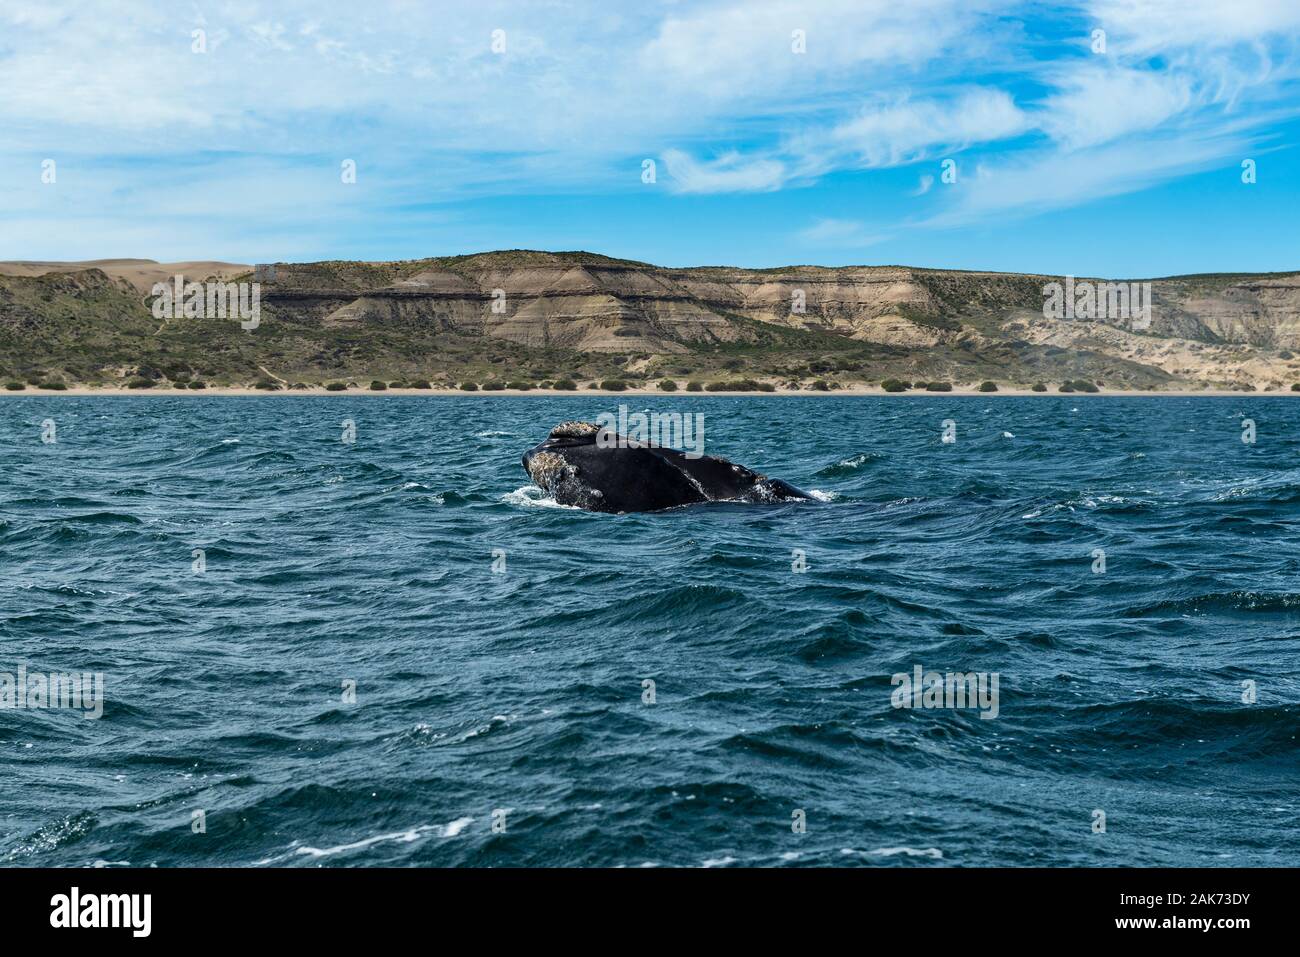 A Southern Right Whale at the Peninsula Valdes in Argentina, South America. Stock Photo